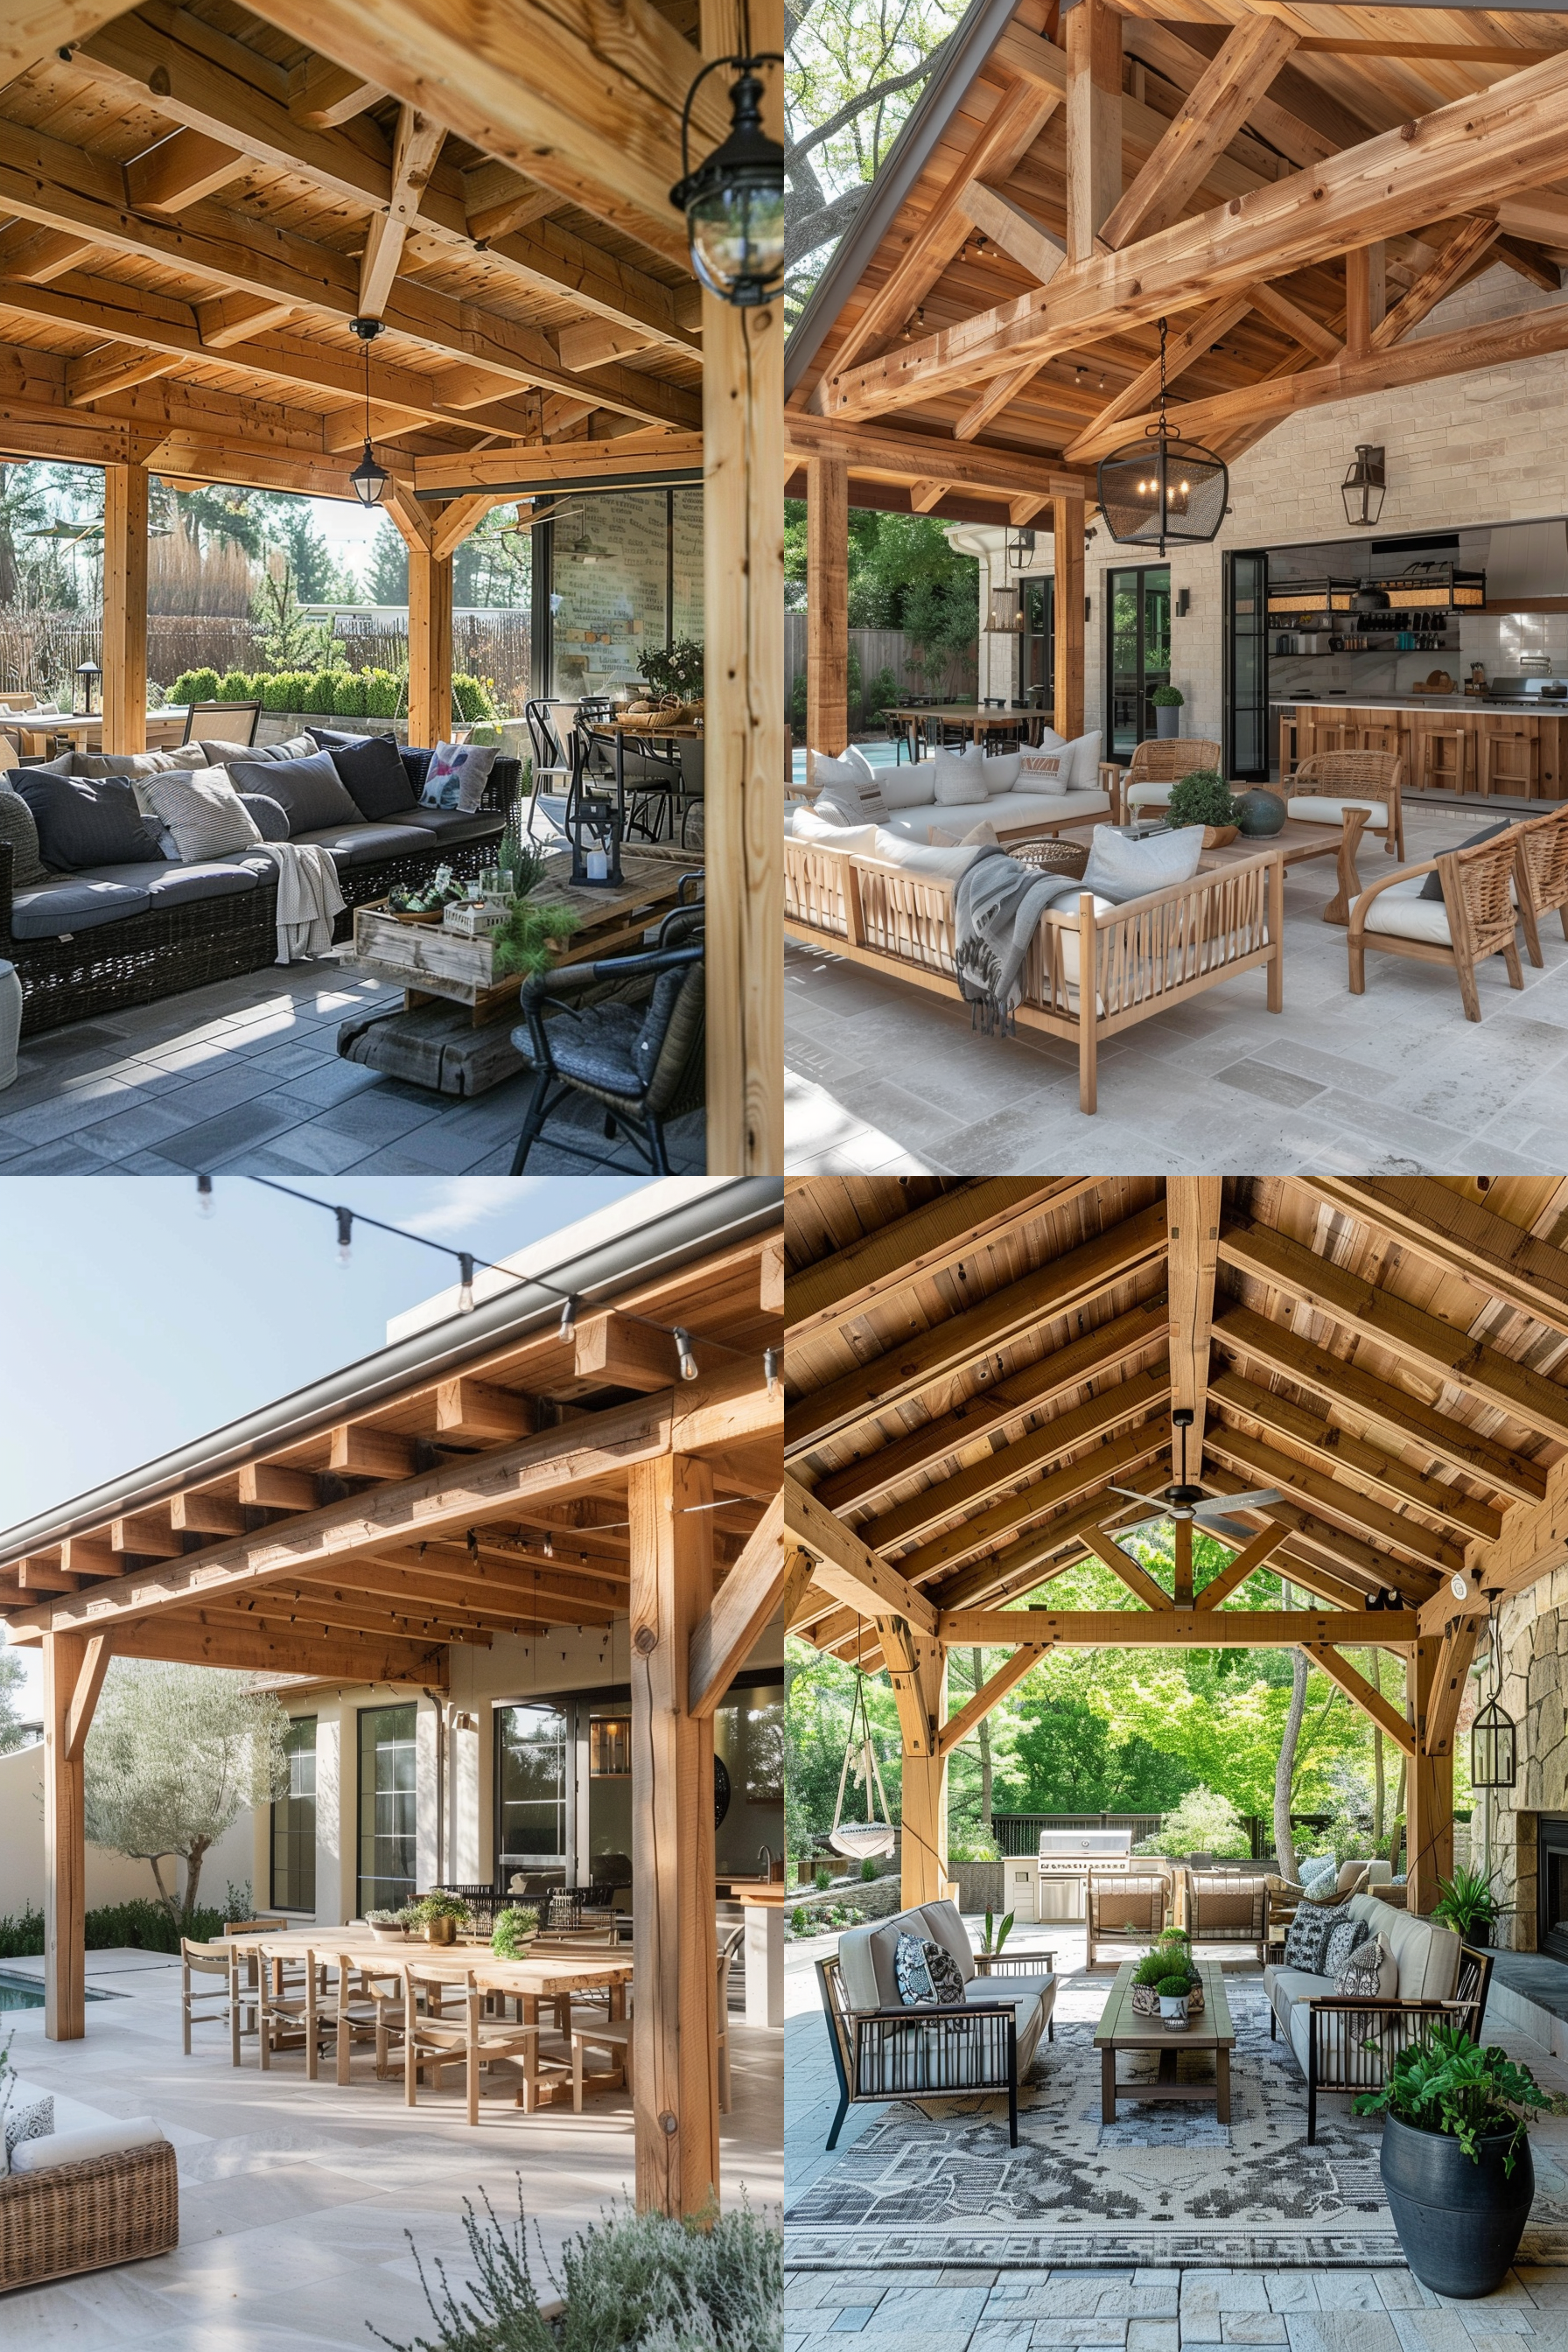 ALT: Collage of an outdoor living space with a wooden patio covering, including a dining area, lounging section with sofa, and an open-air kitchen.